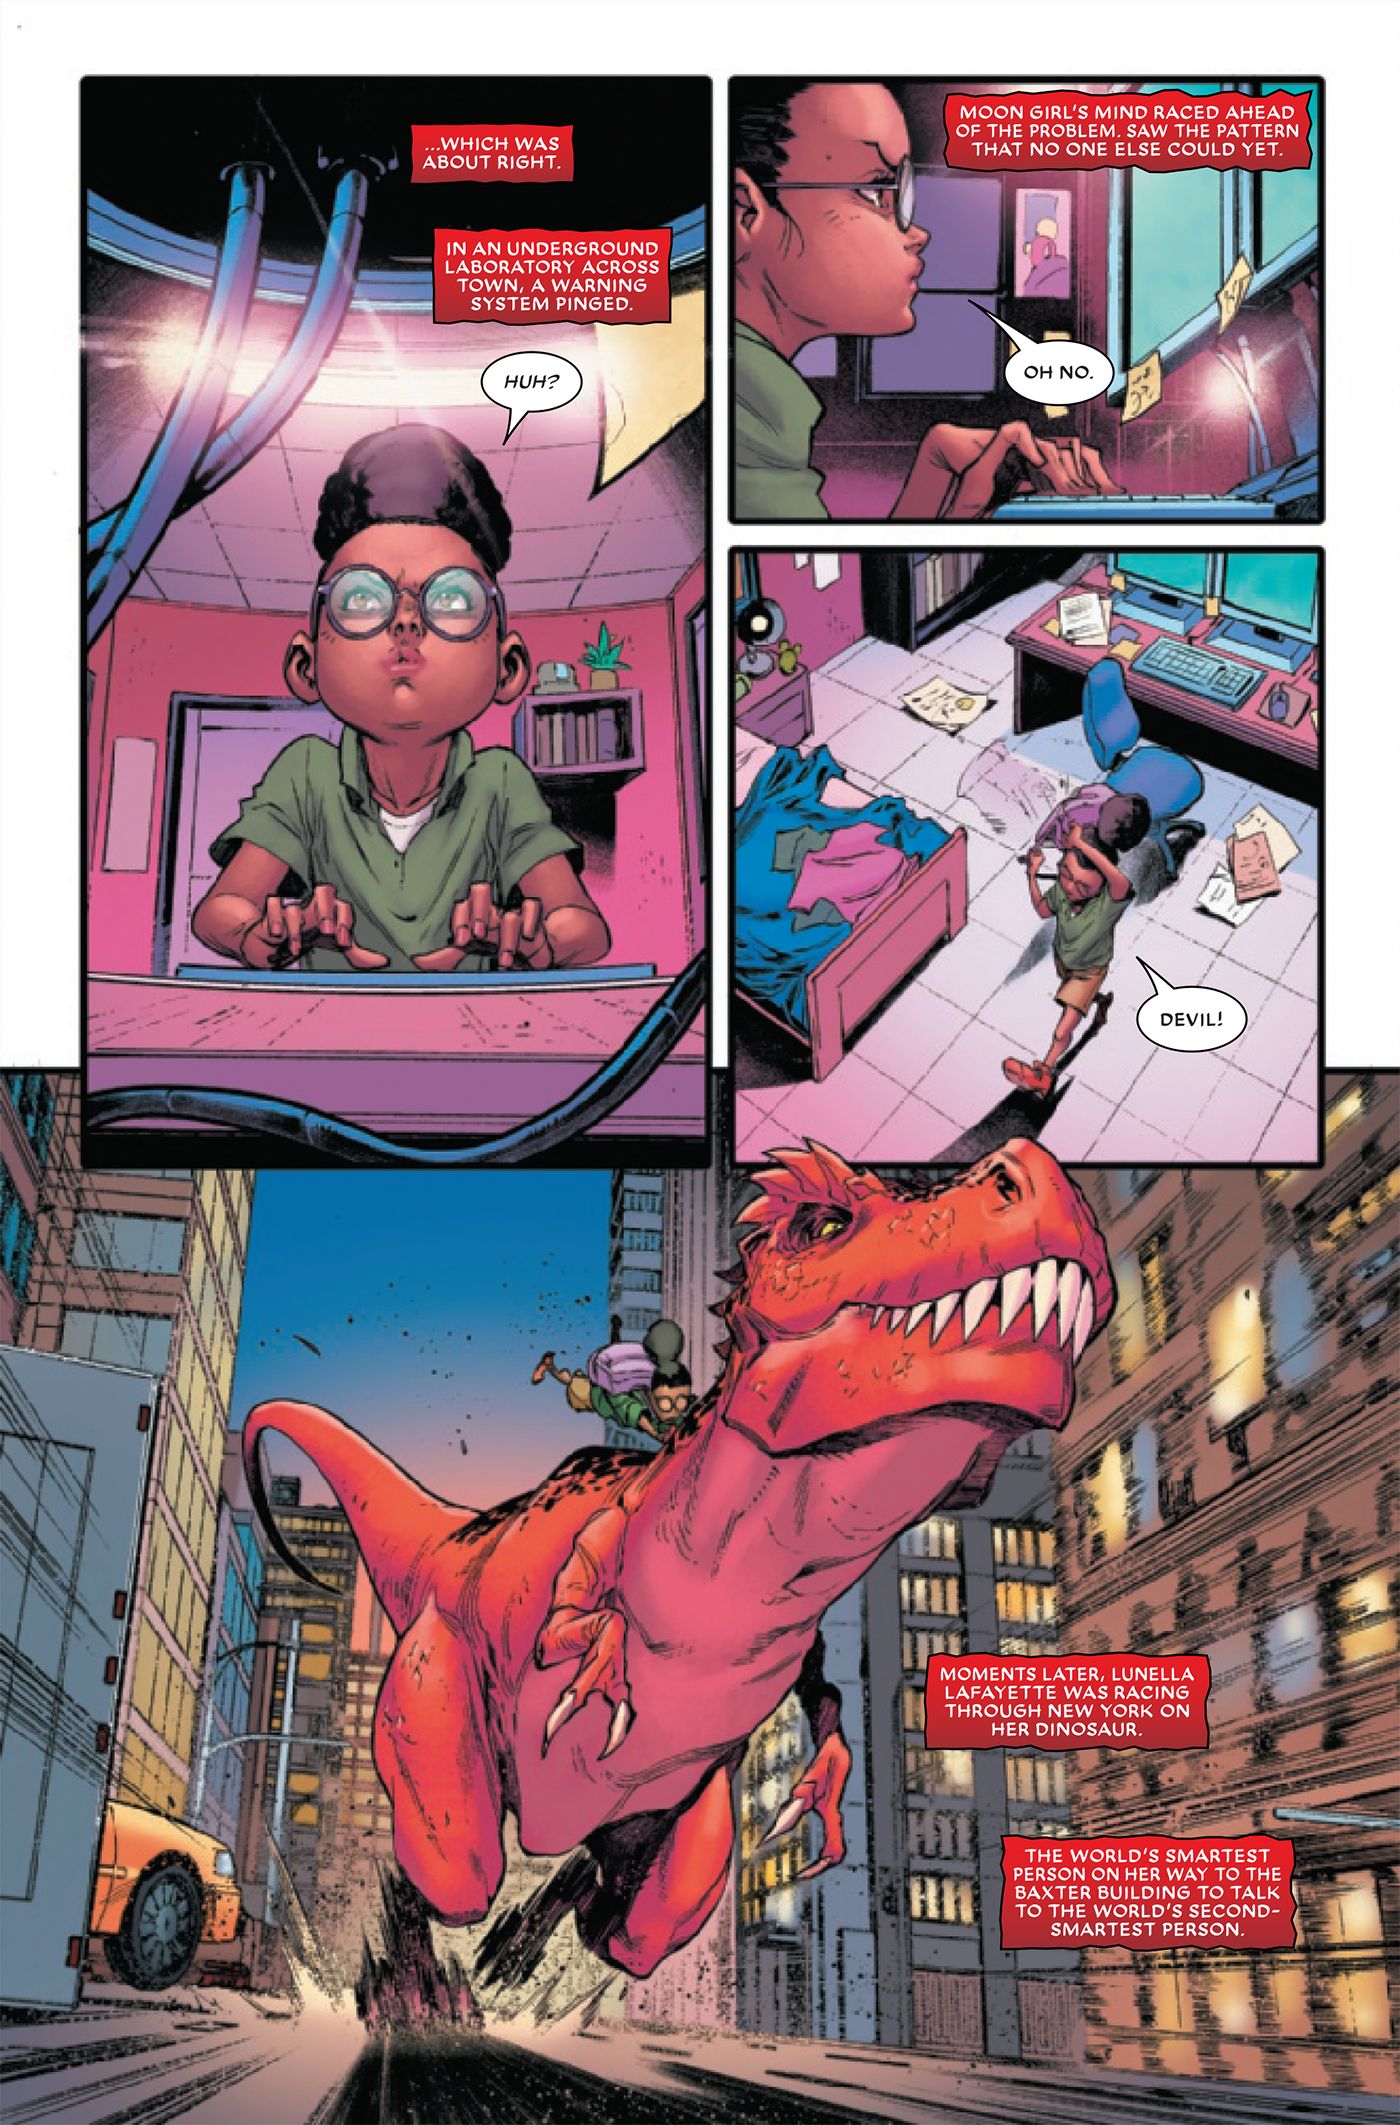 Moon Girl detects the threat and rides off on Devil Dinosaur to meet Mr. Fantastic.